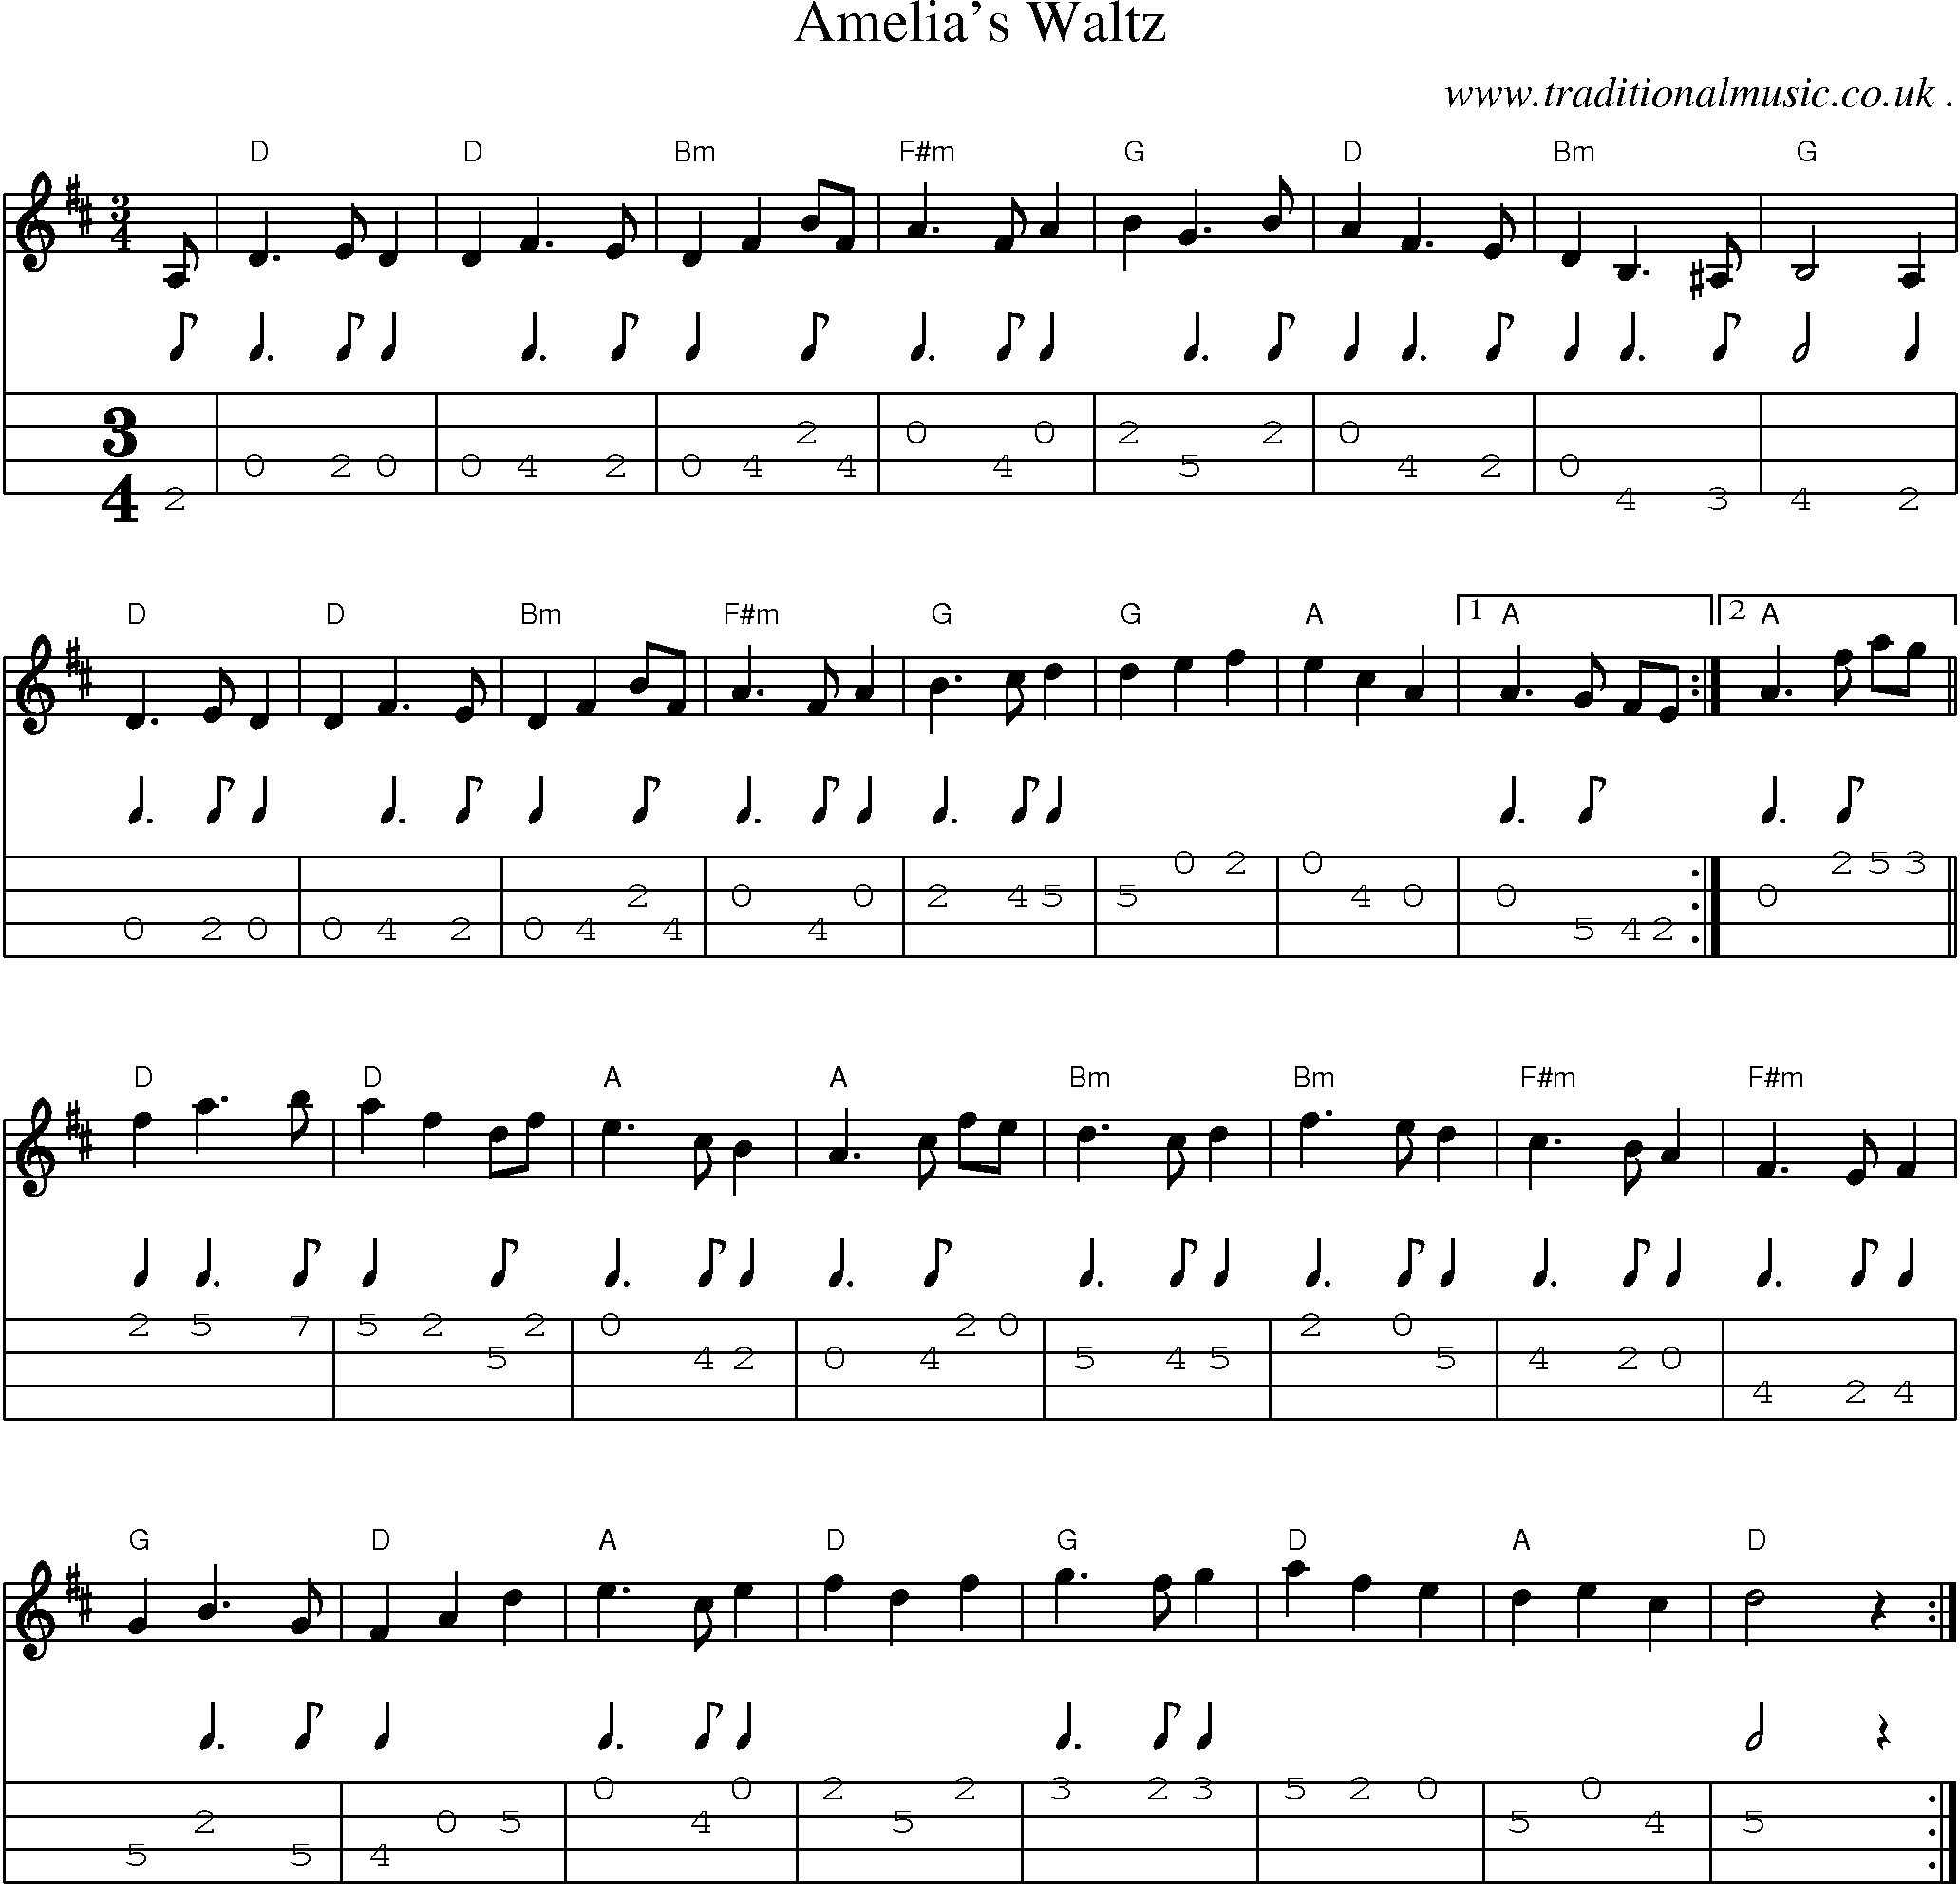 Music Score and Guitar Tabs for Amelias Waltz